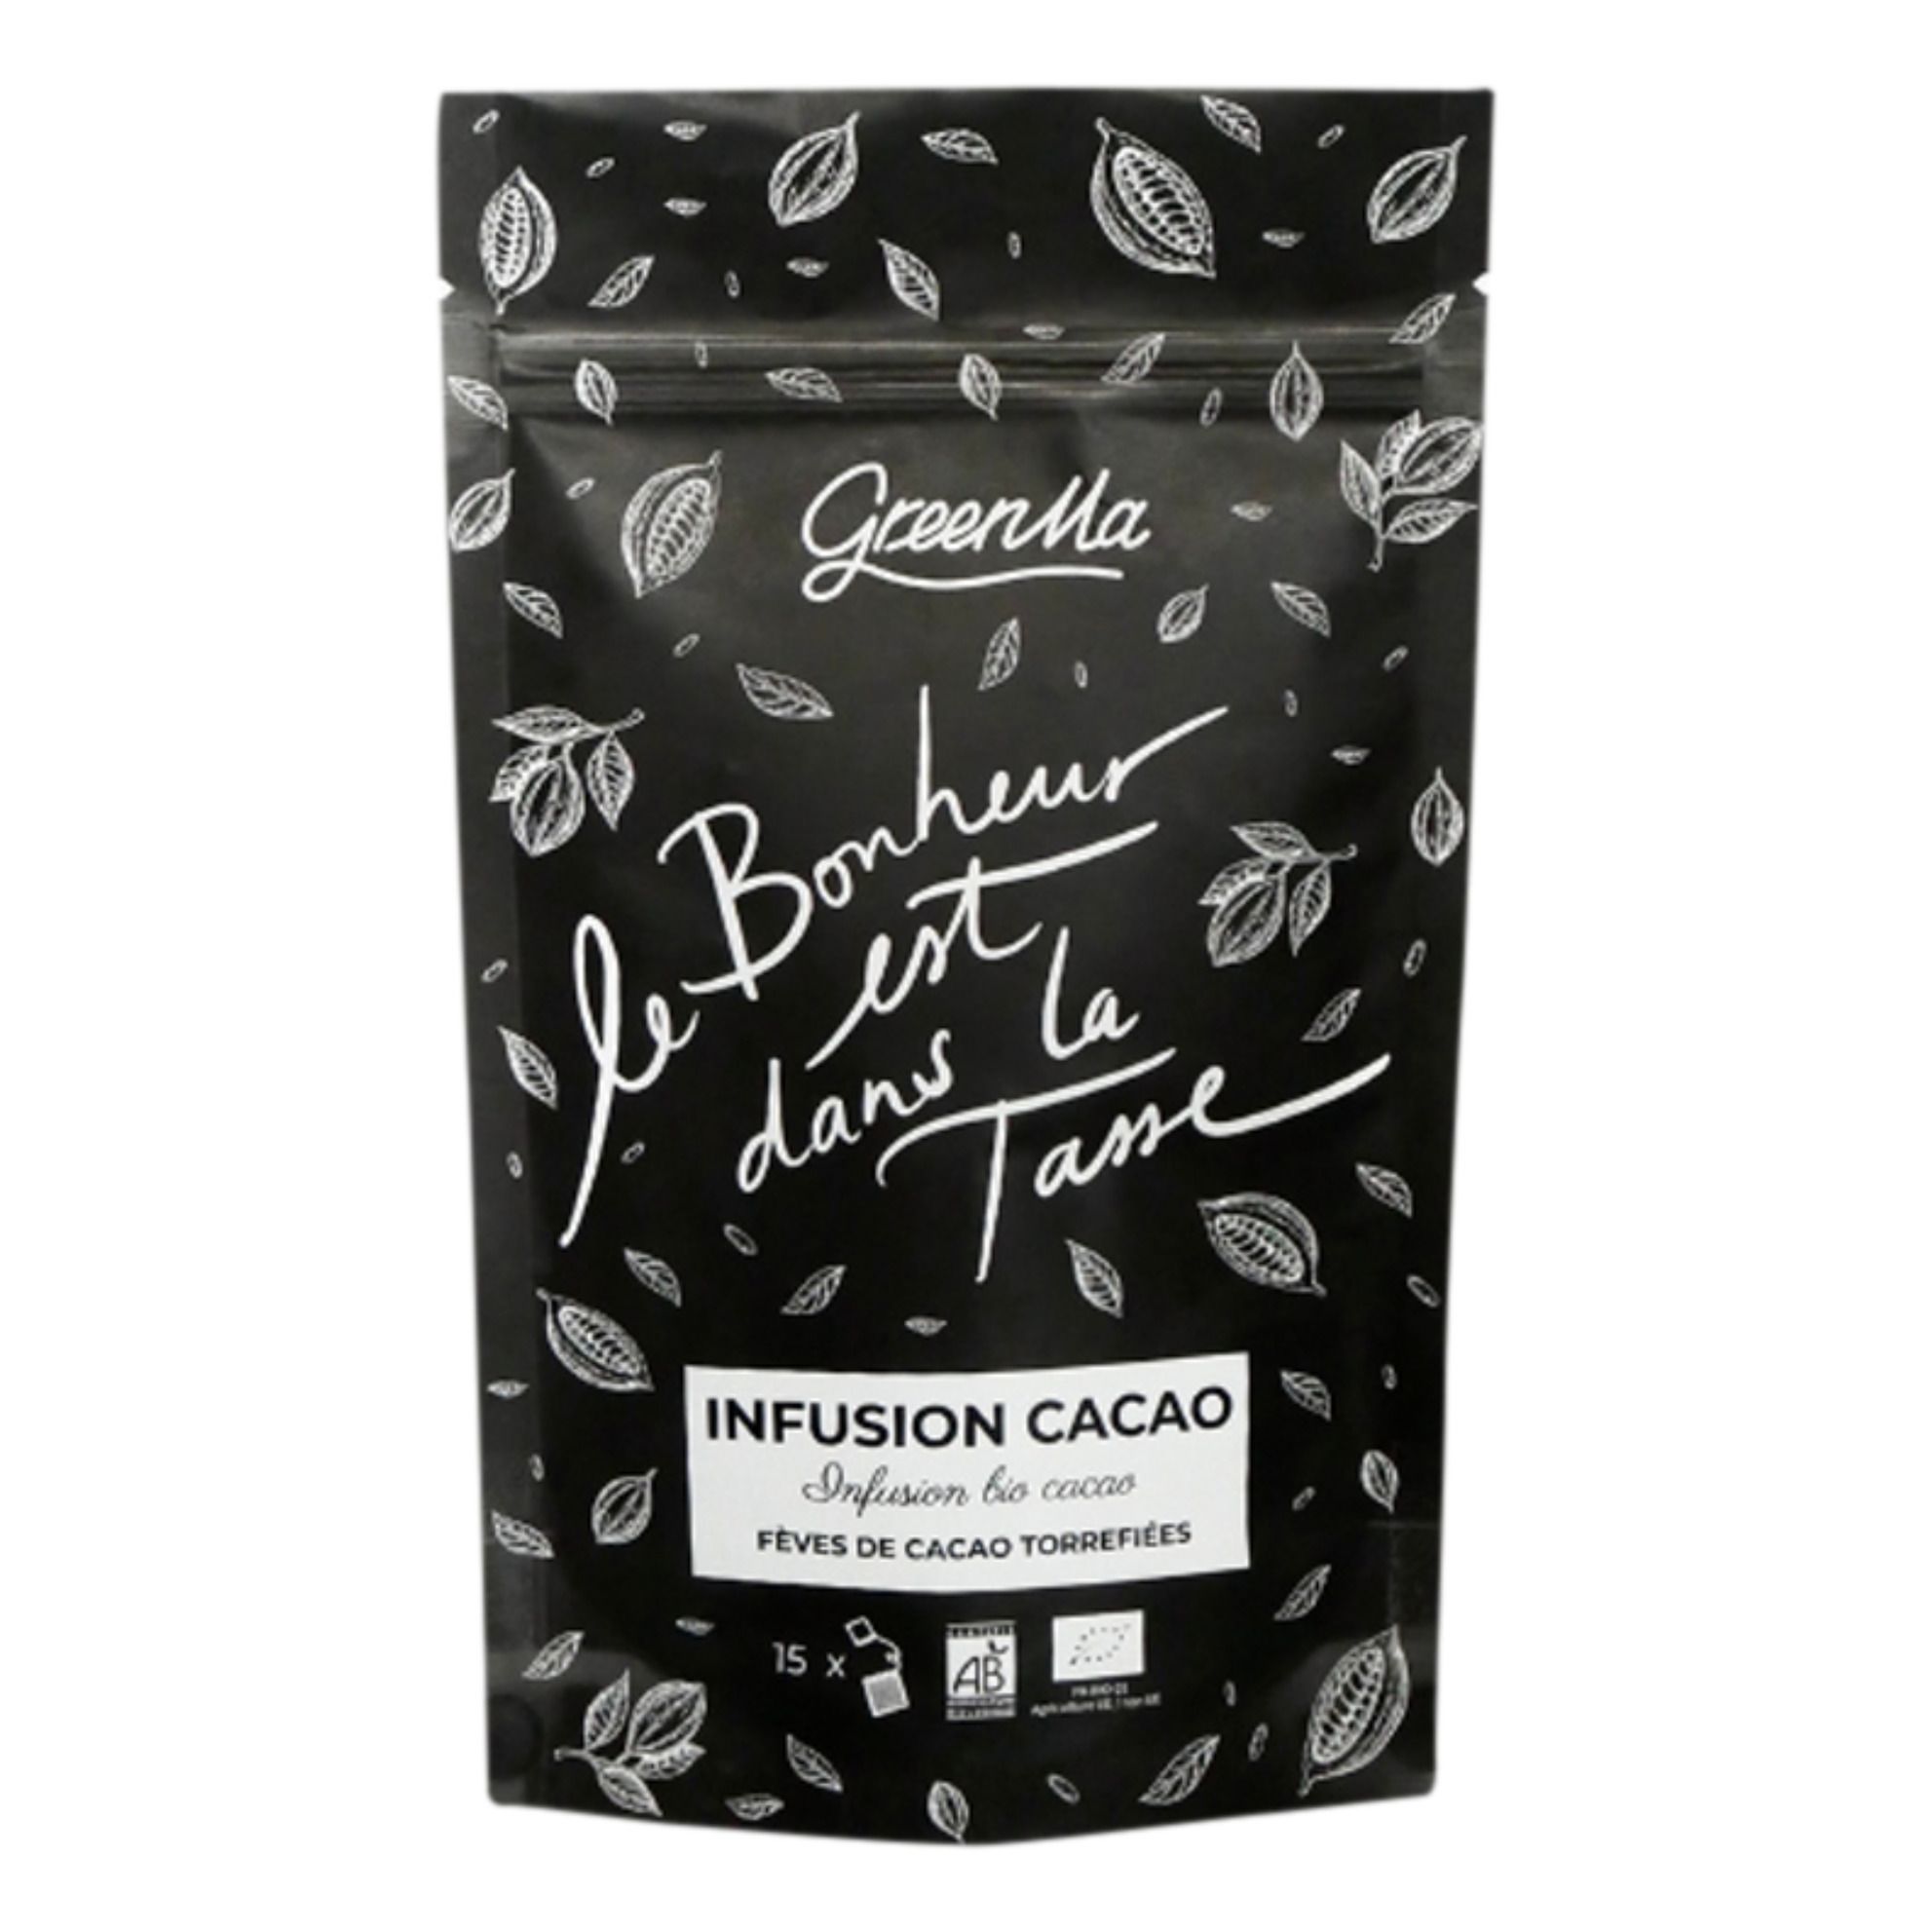 Infusion Cacao - 15 mousselines (GreenMa) - Image 1